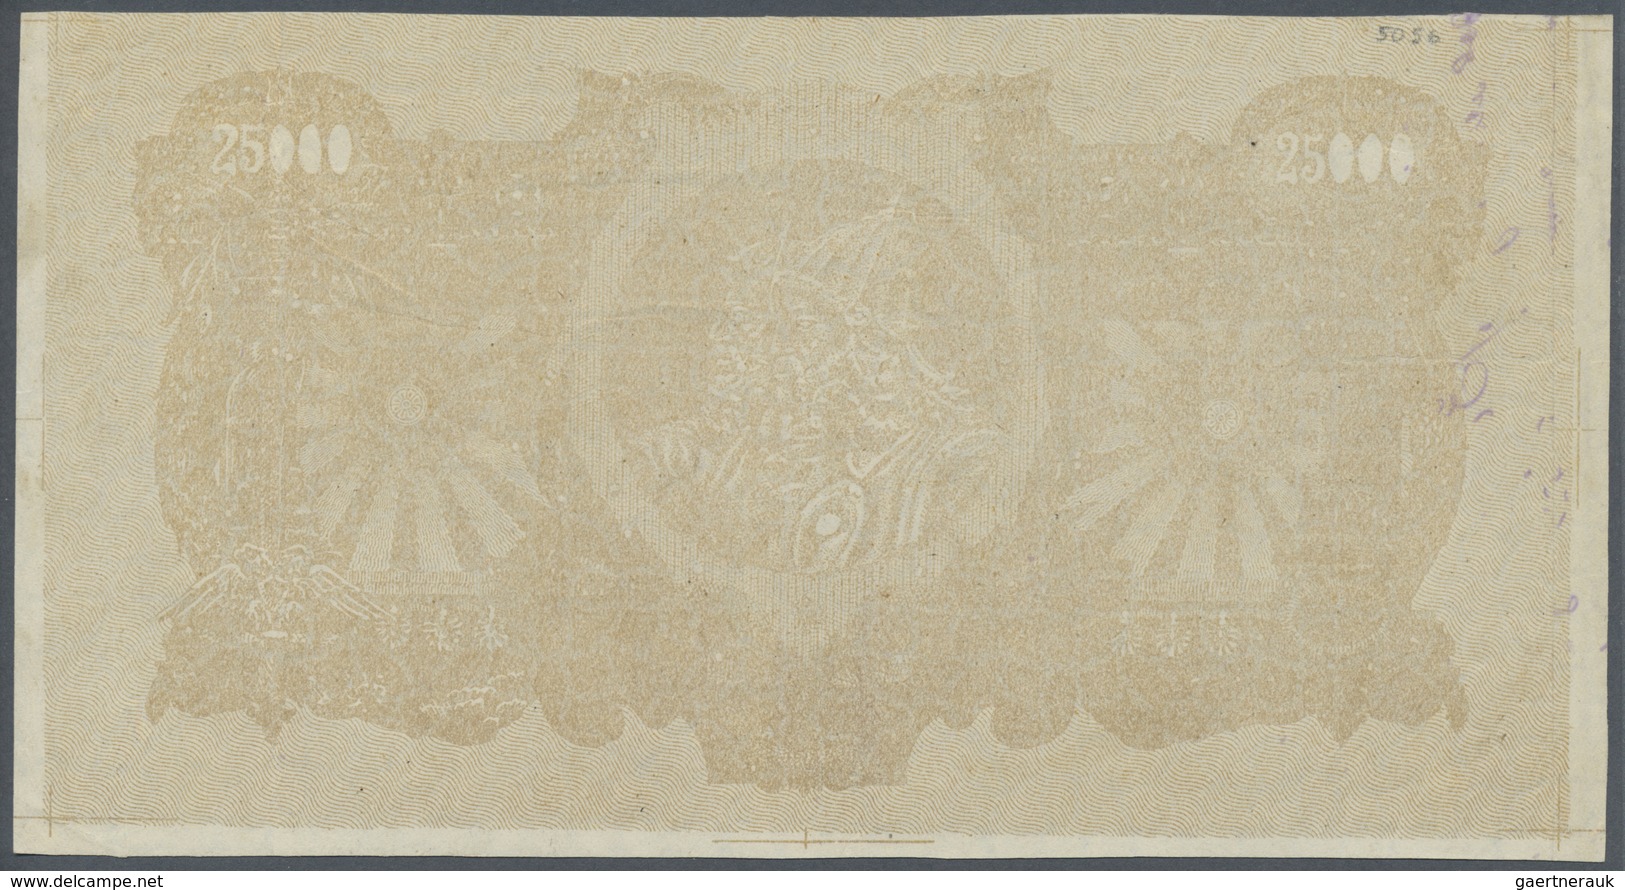 Russia / Russland: 25.000 Rubles 1920 P. S427, Unfinished Printing, Only Front Printed, Series AA-00 - Russie